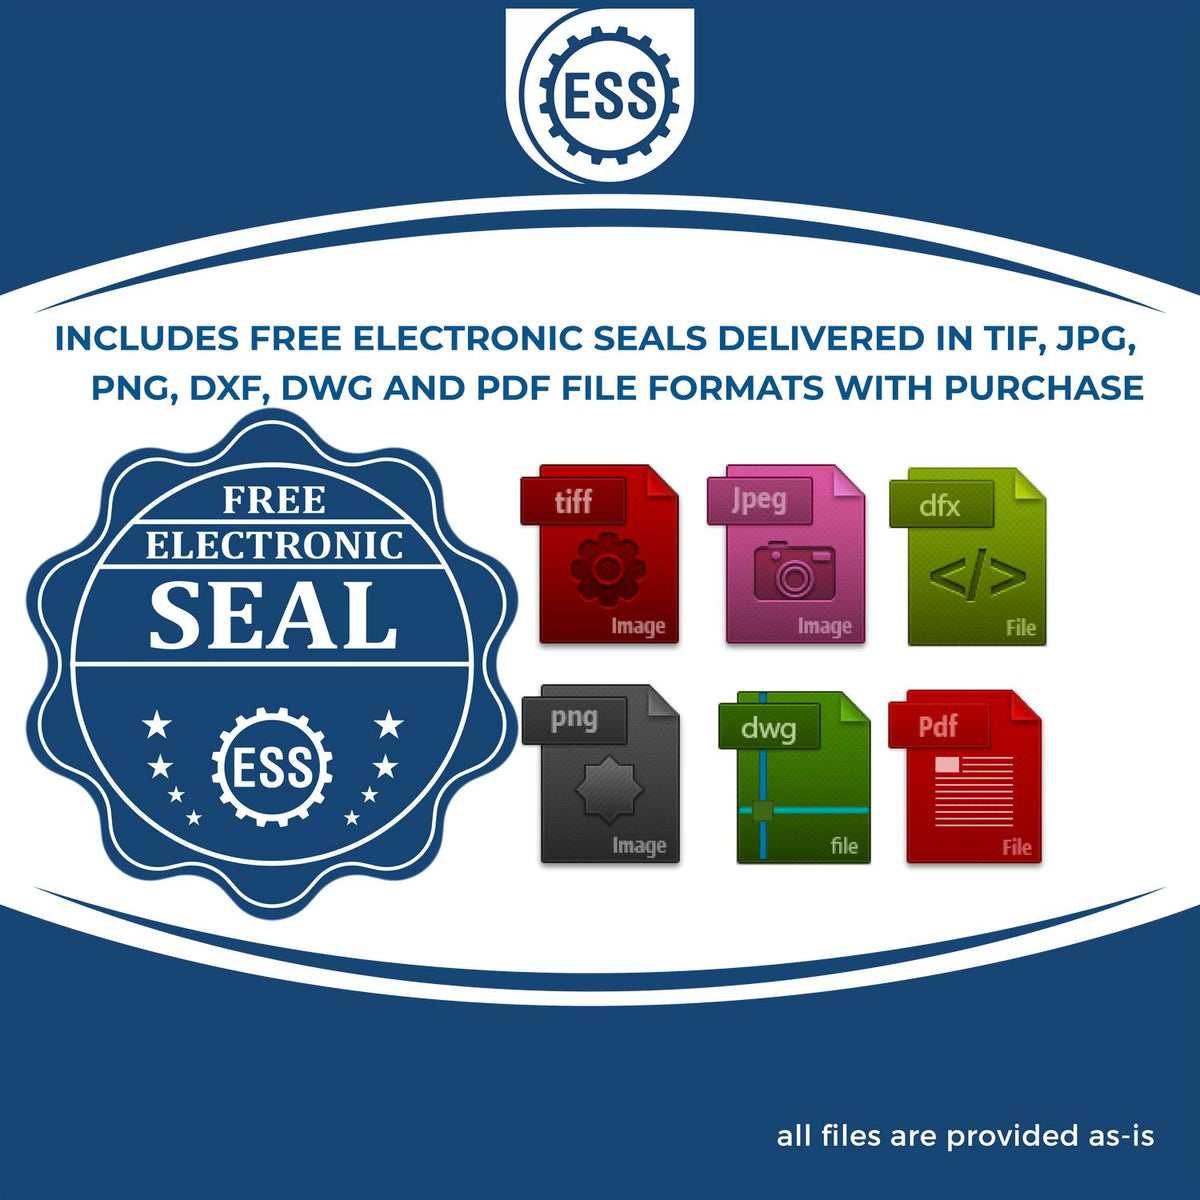 An infographic for the free electronic seal for the Self-Inking Michigan Geologist Stamp illustrating the different file type icons such as DXF, DWG, TIF, JPG and PNG.